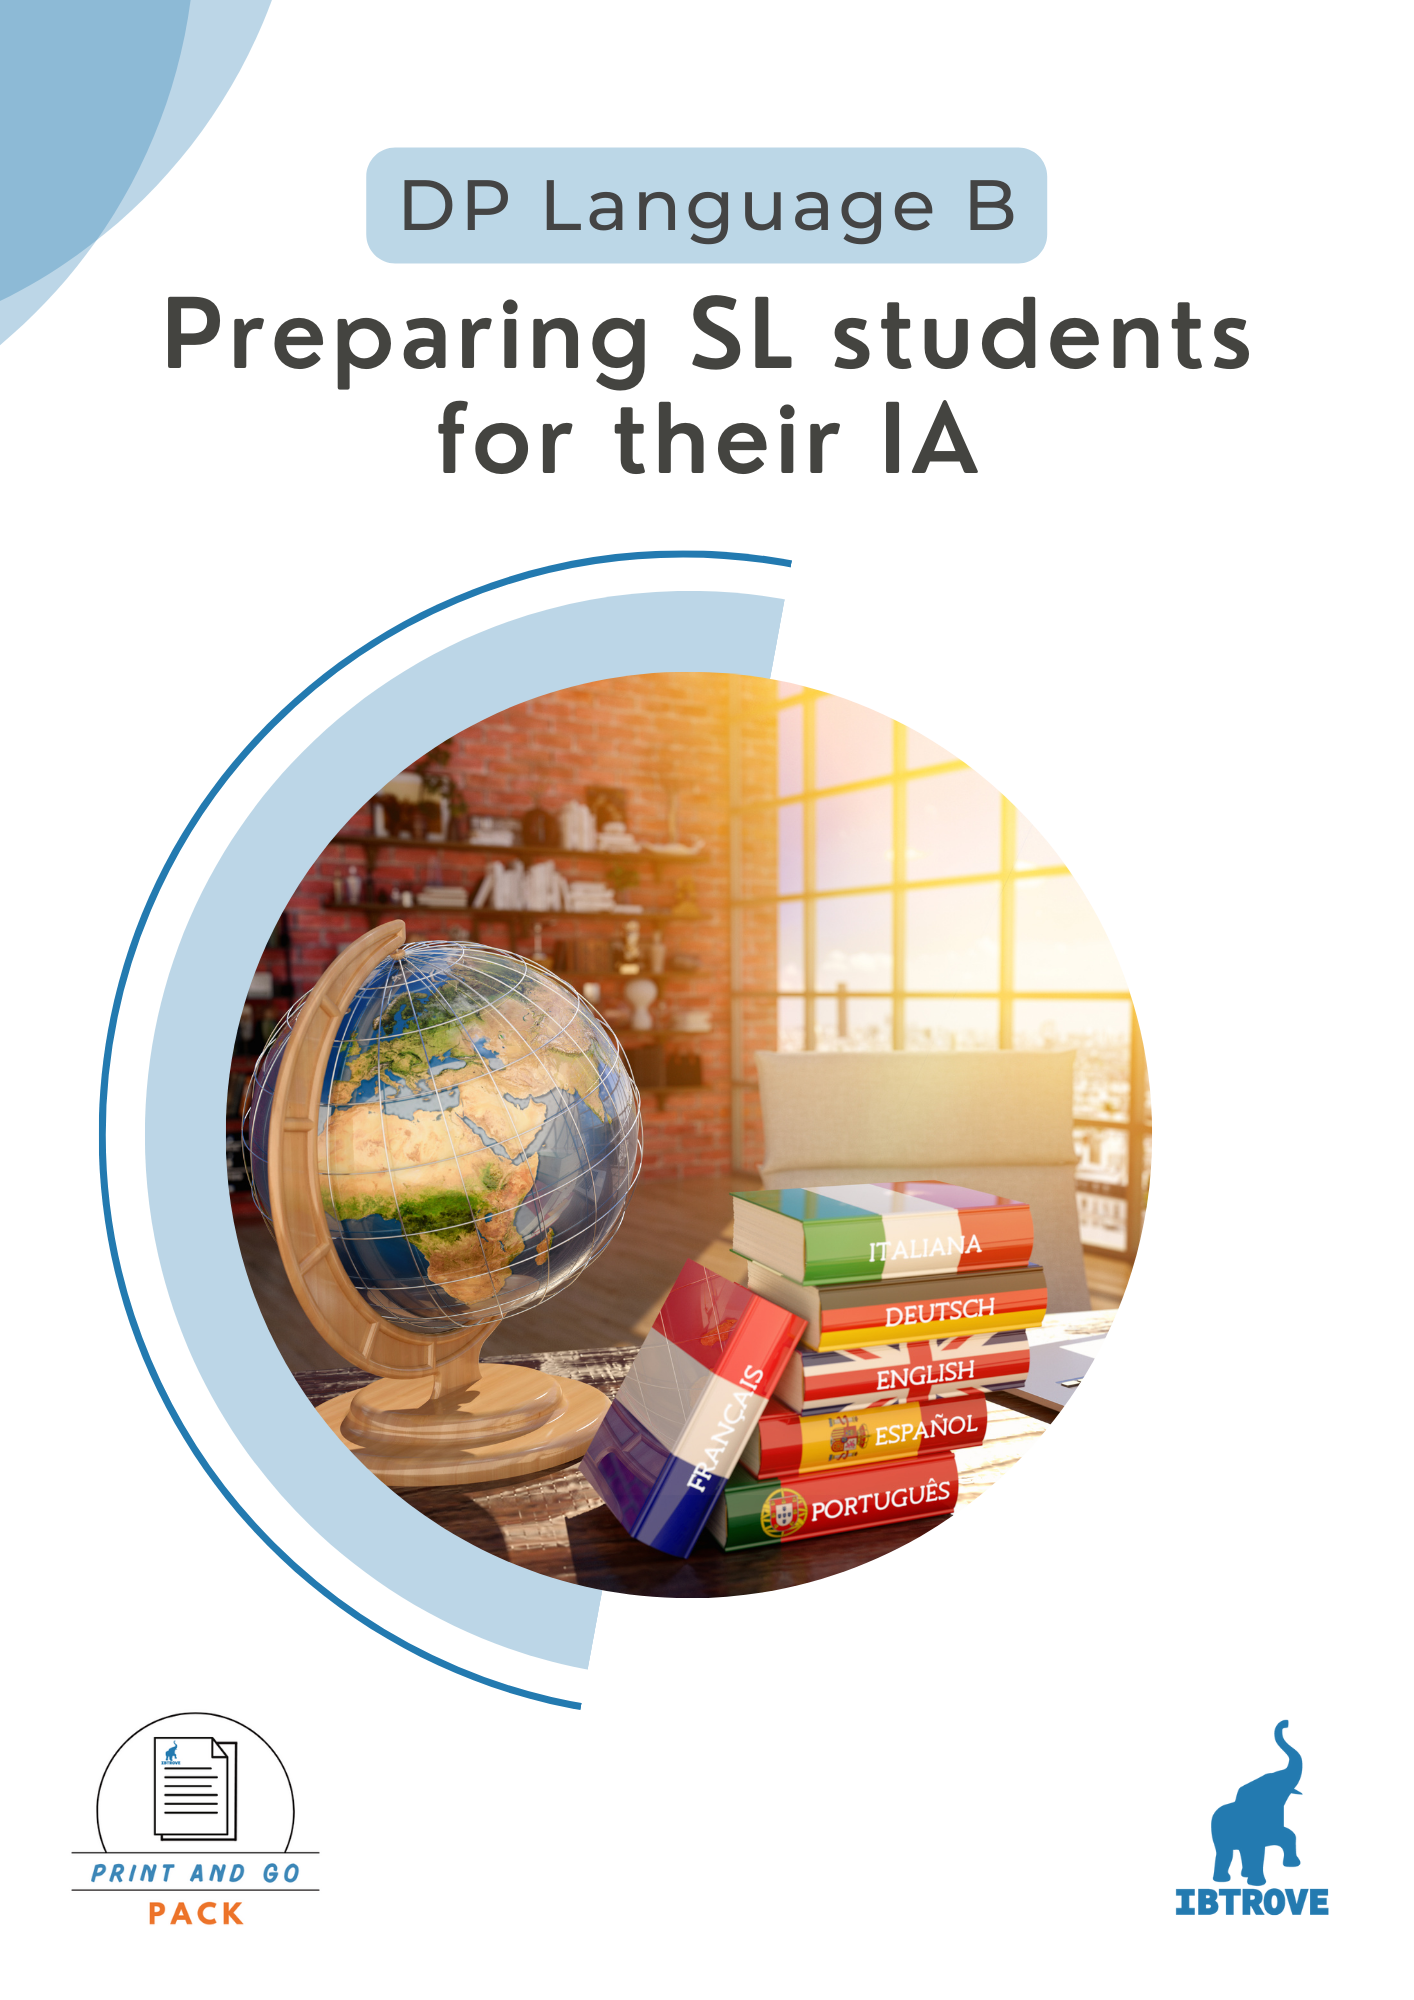 Preparing SL students for their IA in DP Language B (Print and Go Pack)